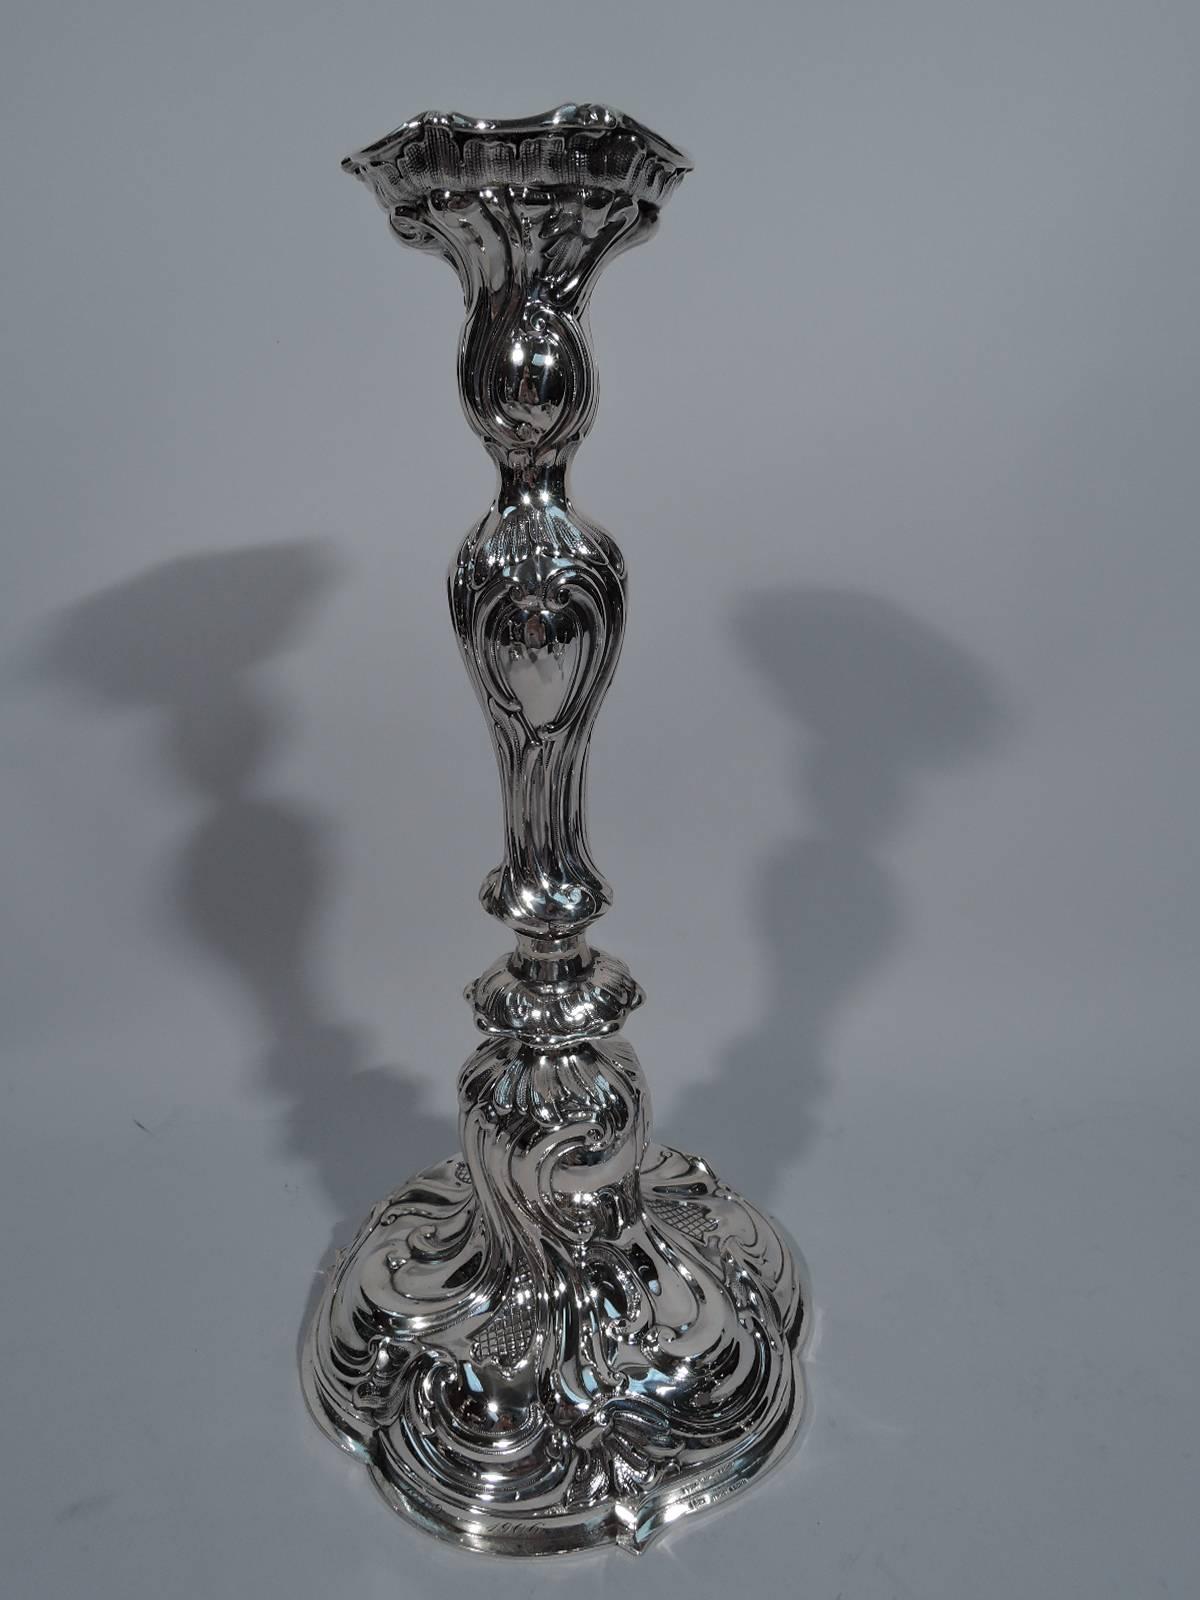 Pair of Rococo 800 silver candlesticks, circa 1900. Made by Strube & Sohn in Germany. Each: Knopped and baluster stem on lobed foot. A dynamic design with scrolls, leaves, and strapwork heightened with pointille. Tall. On foot German script